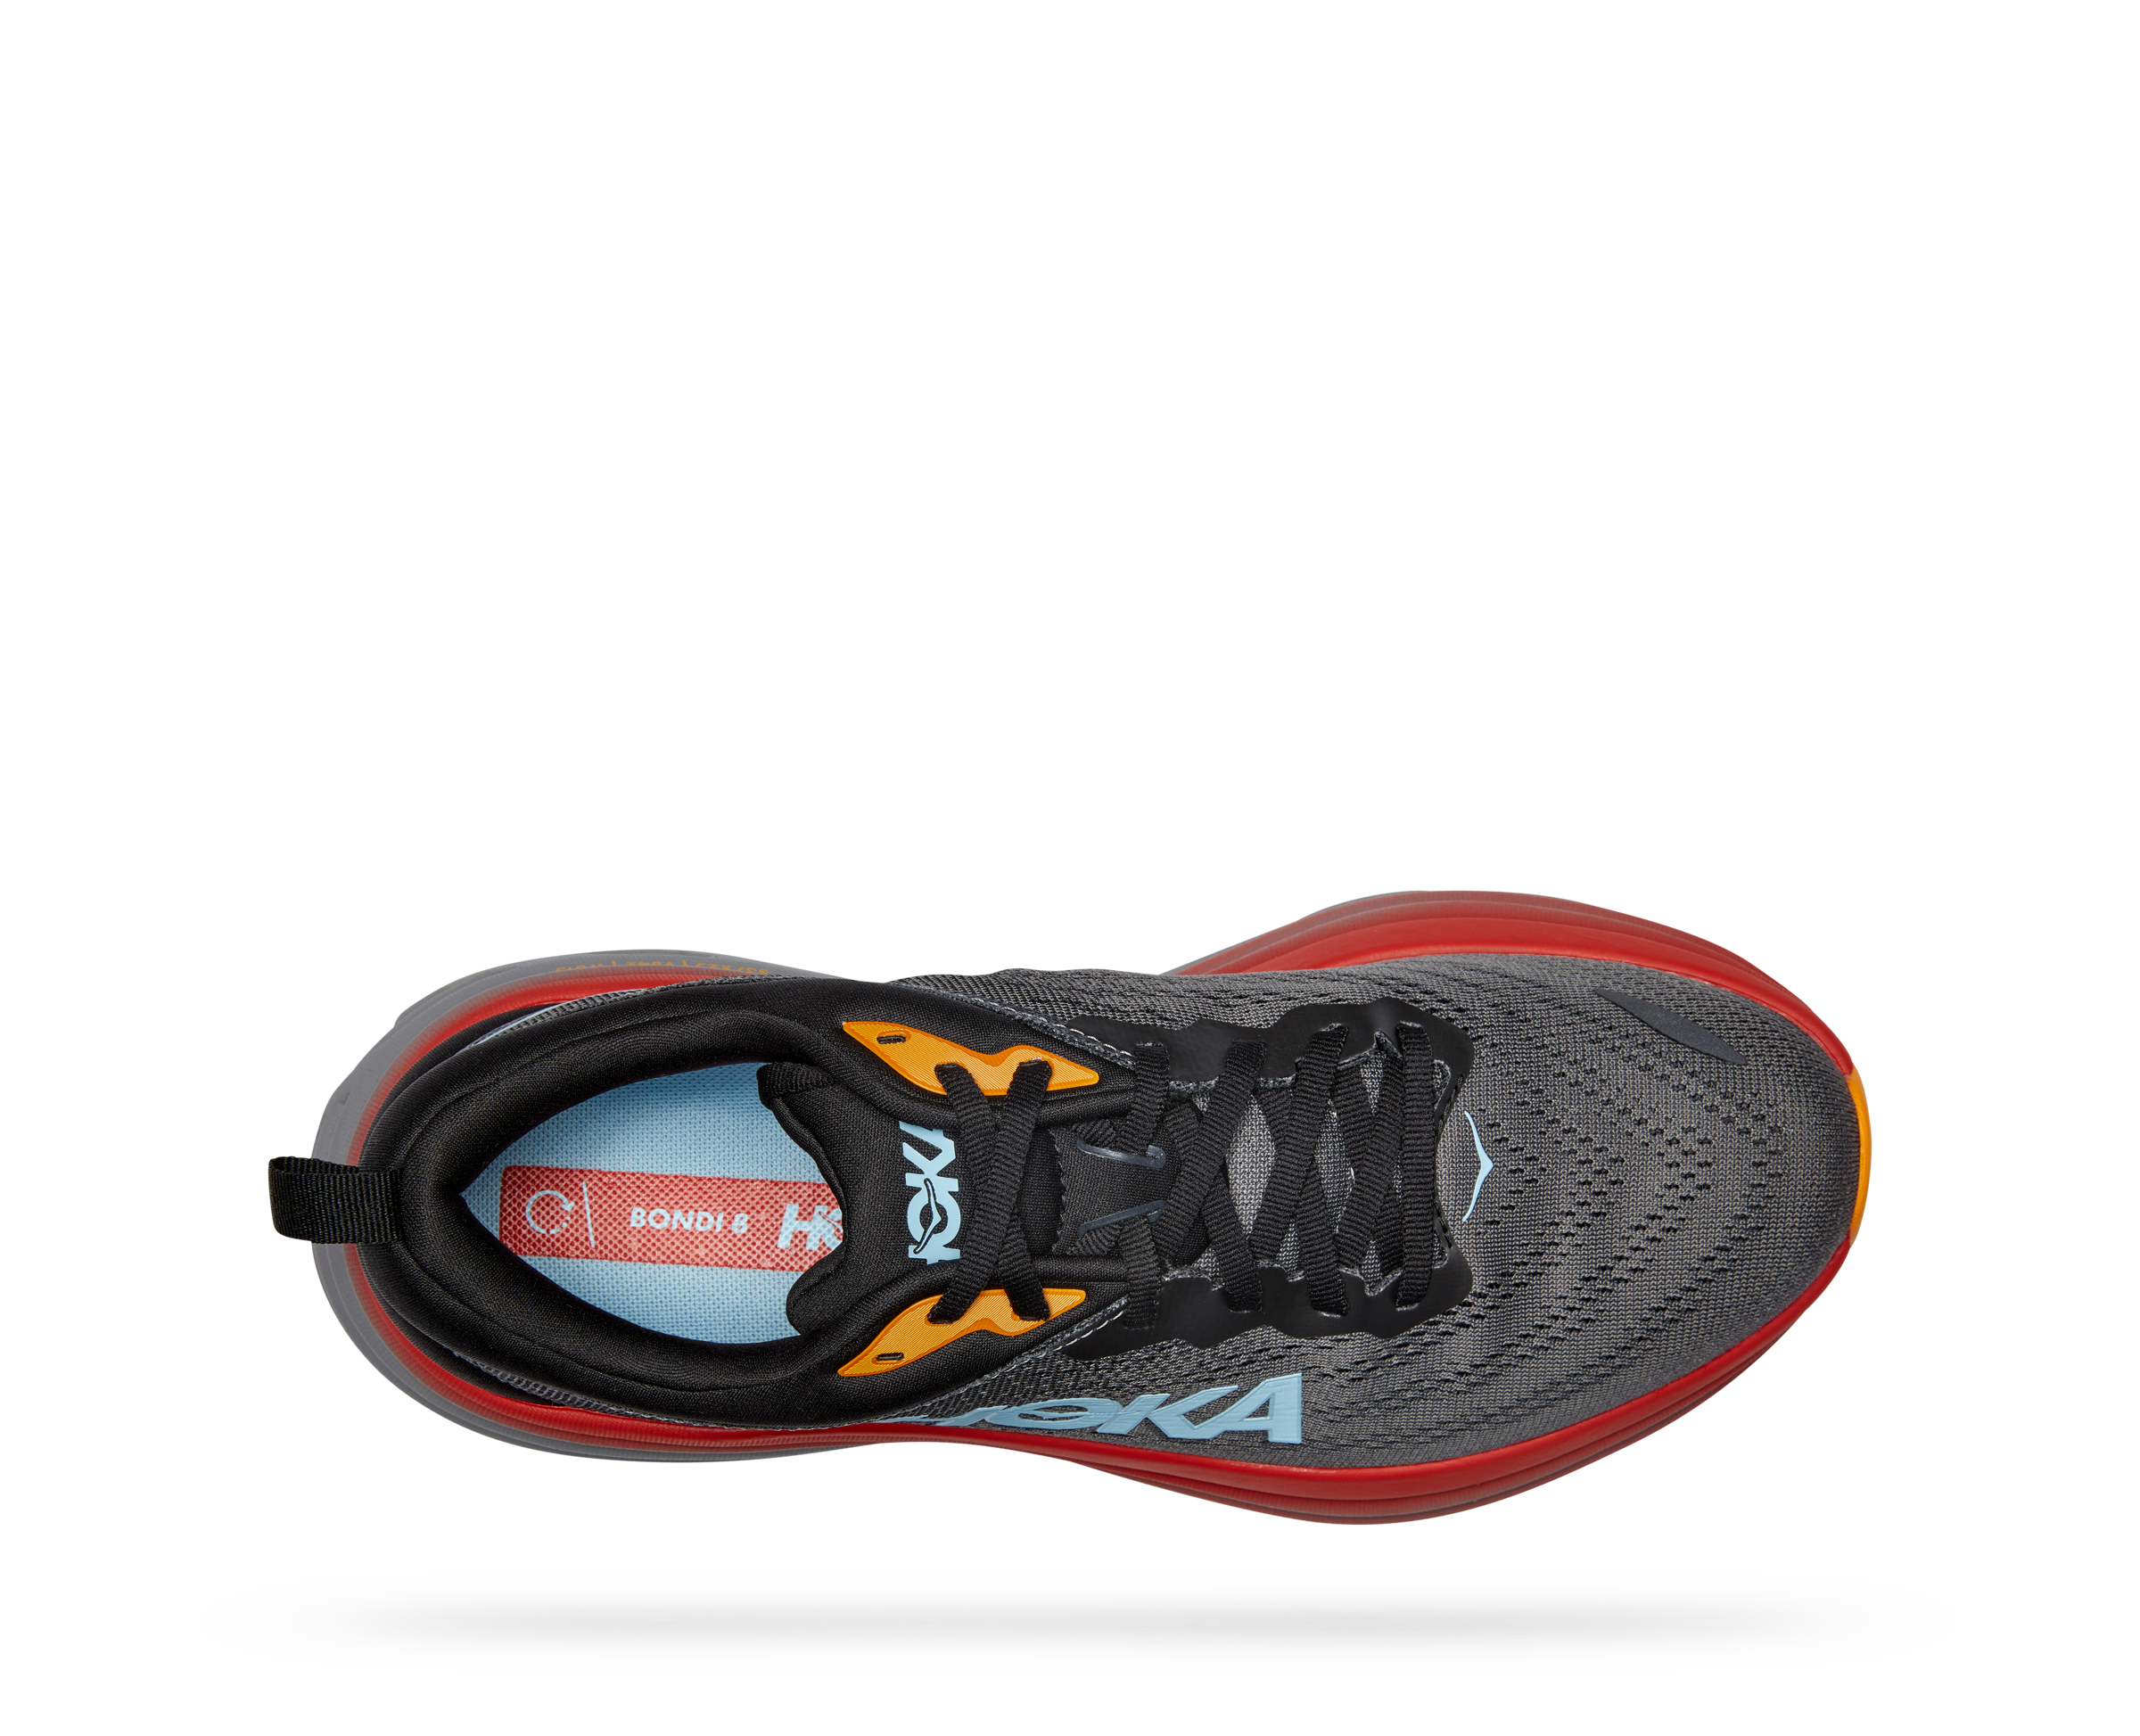 This is a top down view of the Hoka Bondi 8. The Hoka Bondi 8 is a ultra-cushioned game-changer. One of the hardest working shoes in the HOKA lineup, the Men's Bondi 8 takes a bold step forward this season reworked with softer, lighter foams and a brand-new extended heel geometry. 